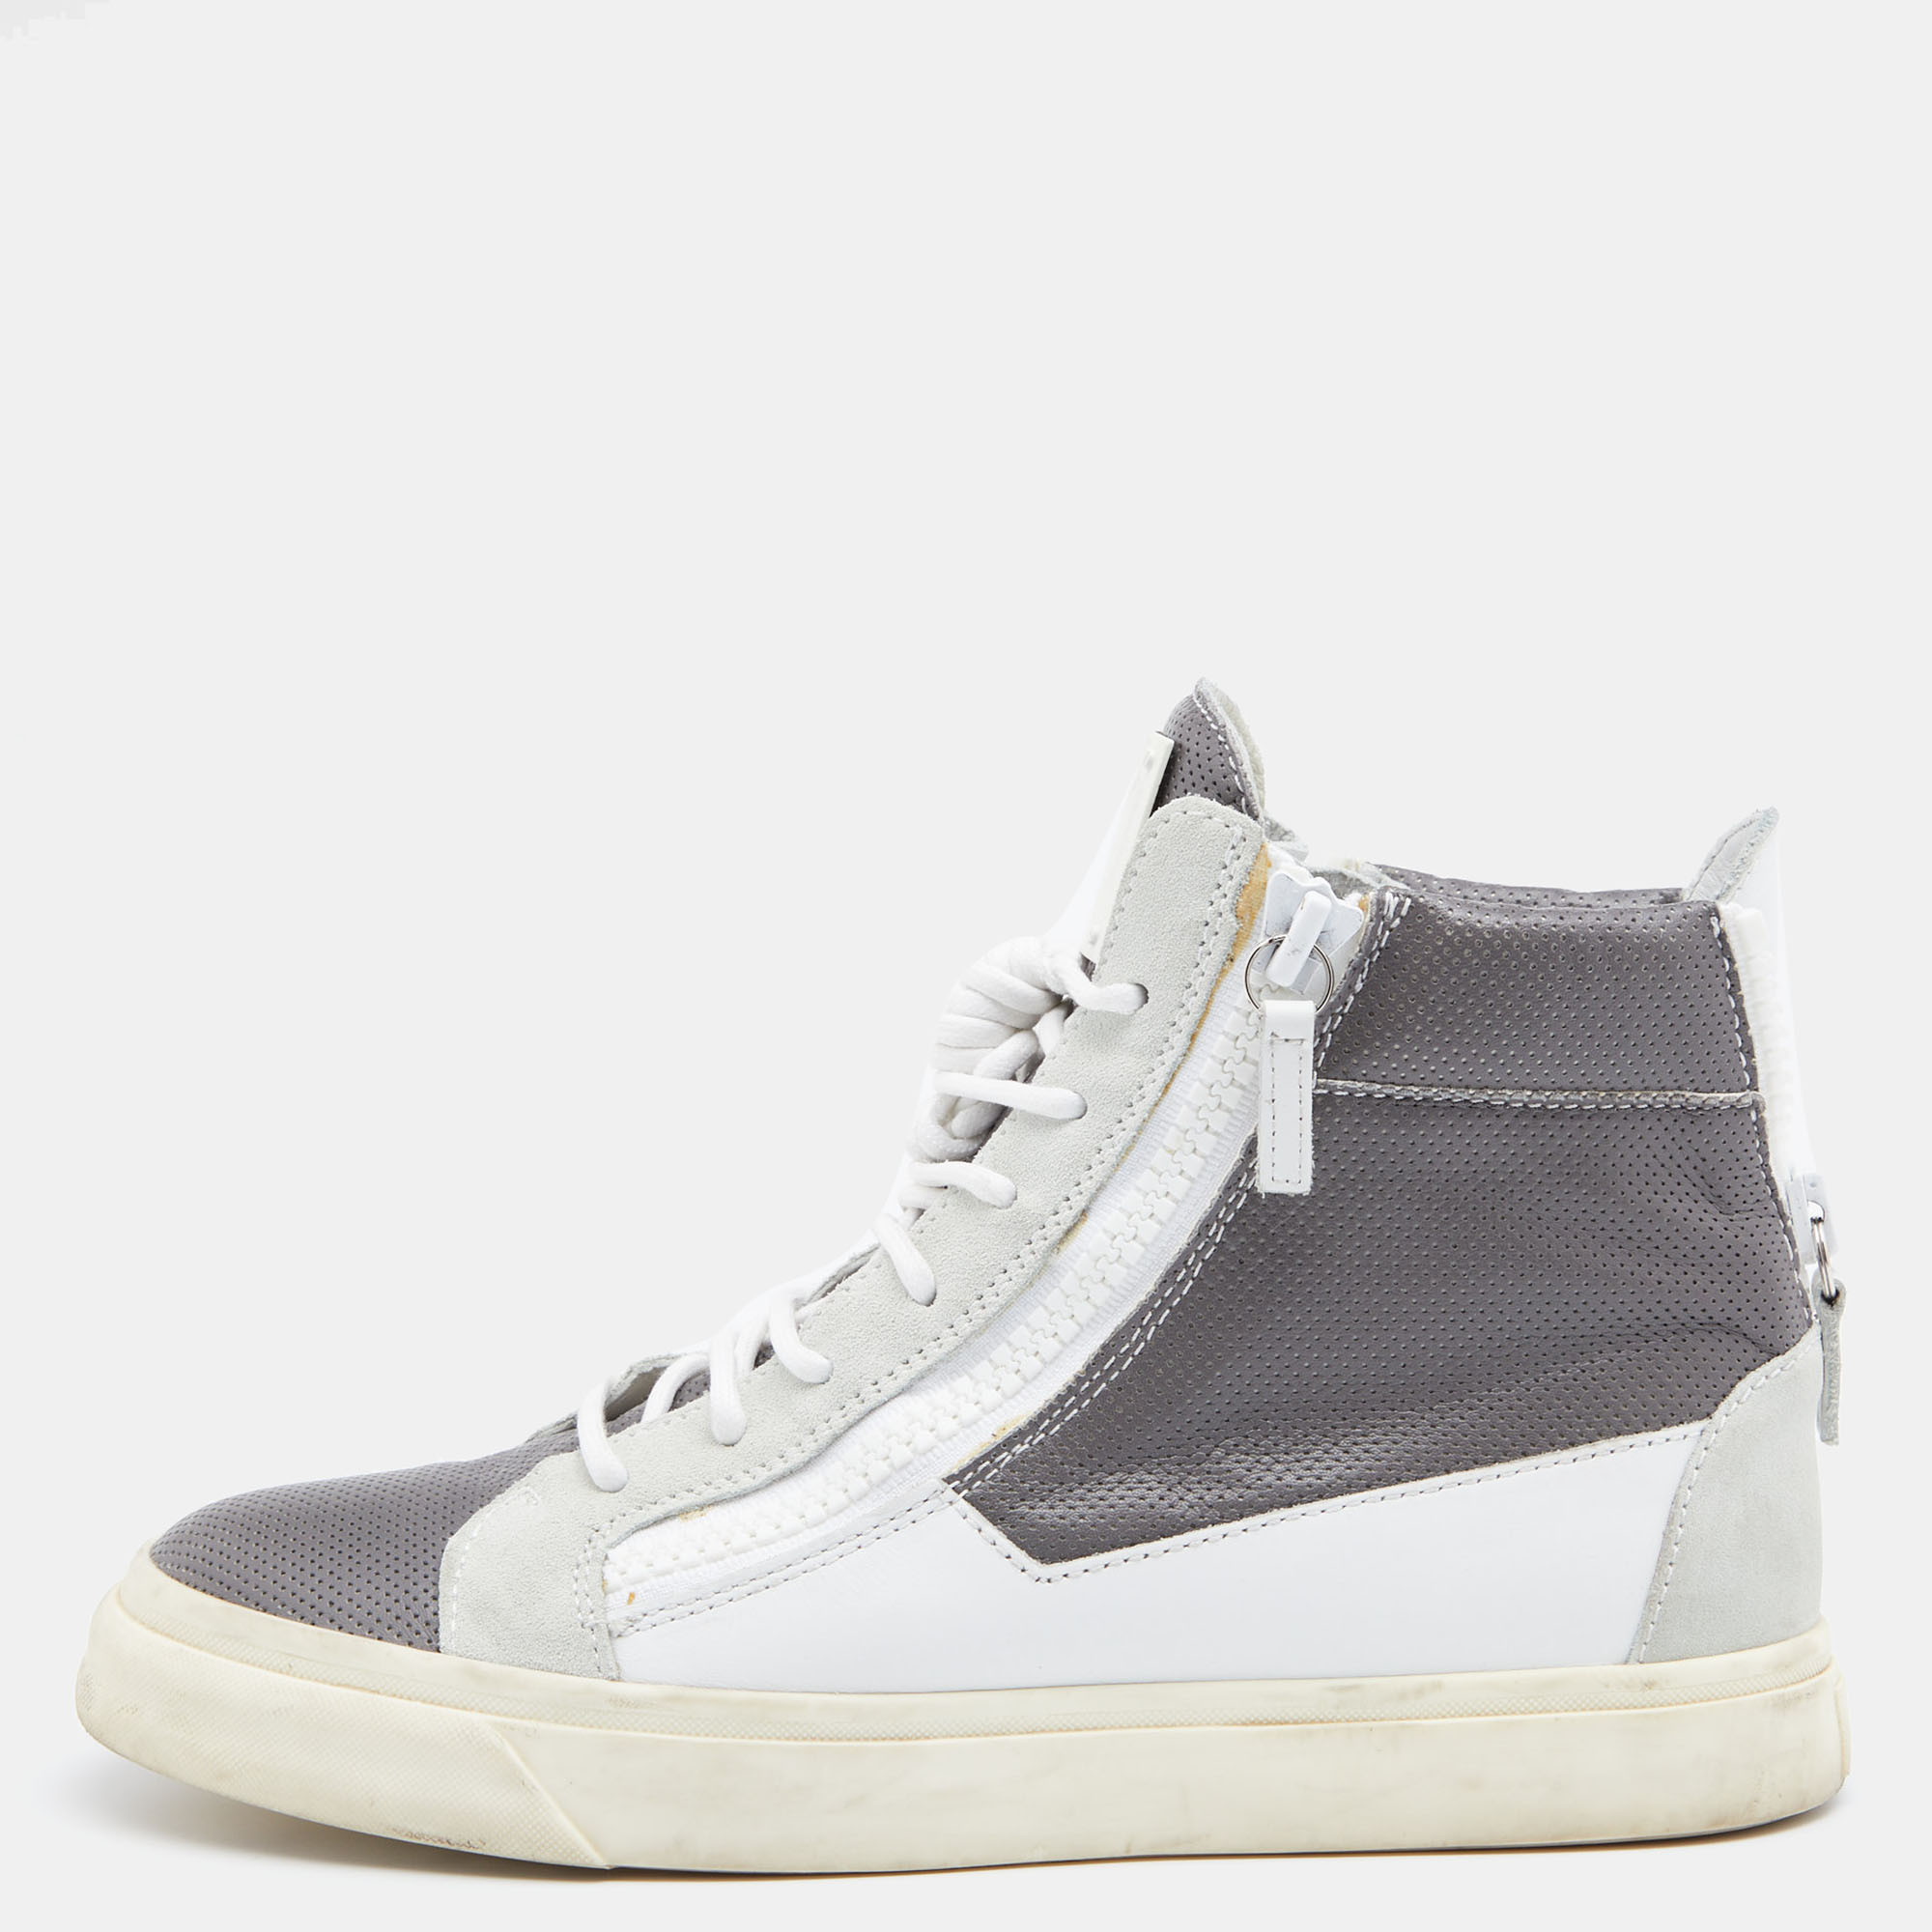 Pre-owned Giuseppe Zanotti Grey/white Perforated Leather And Suede Double Zip High Top Trainers Size 40